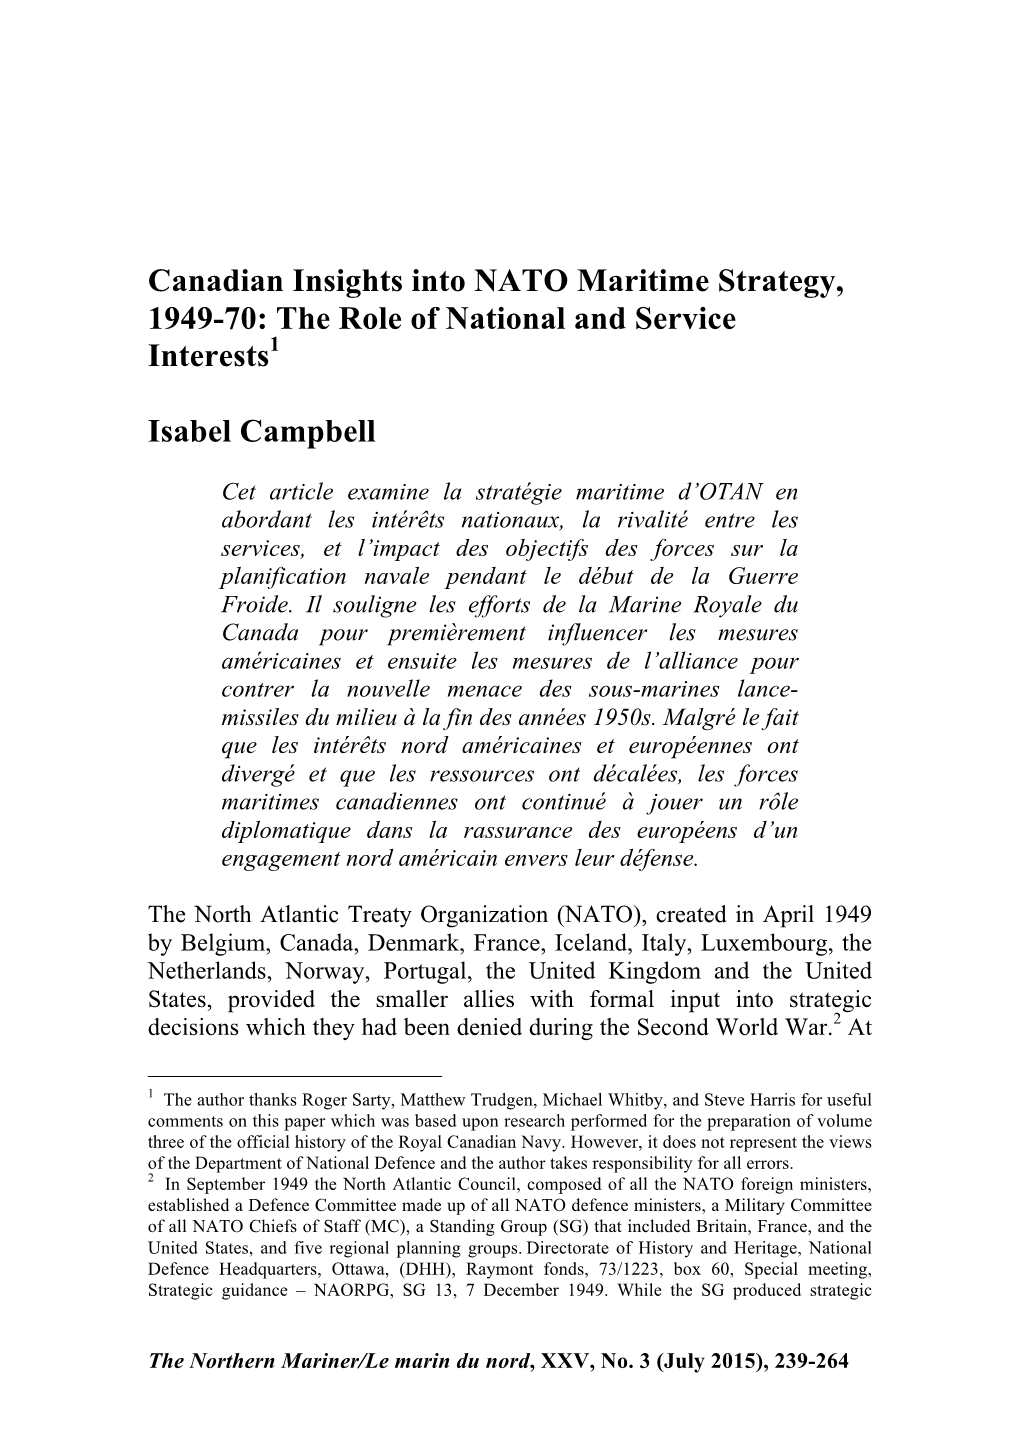 Canadian Insights Into NATO Maritime Strategy, 1949-70: the Role of National and Service Interests1